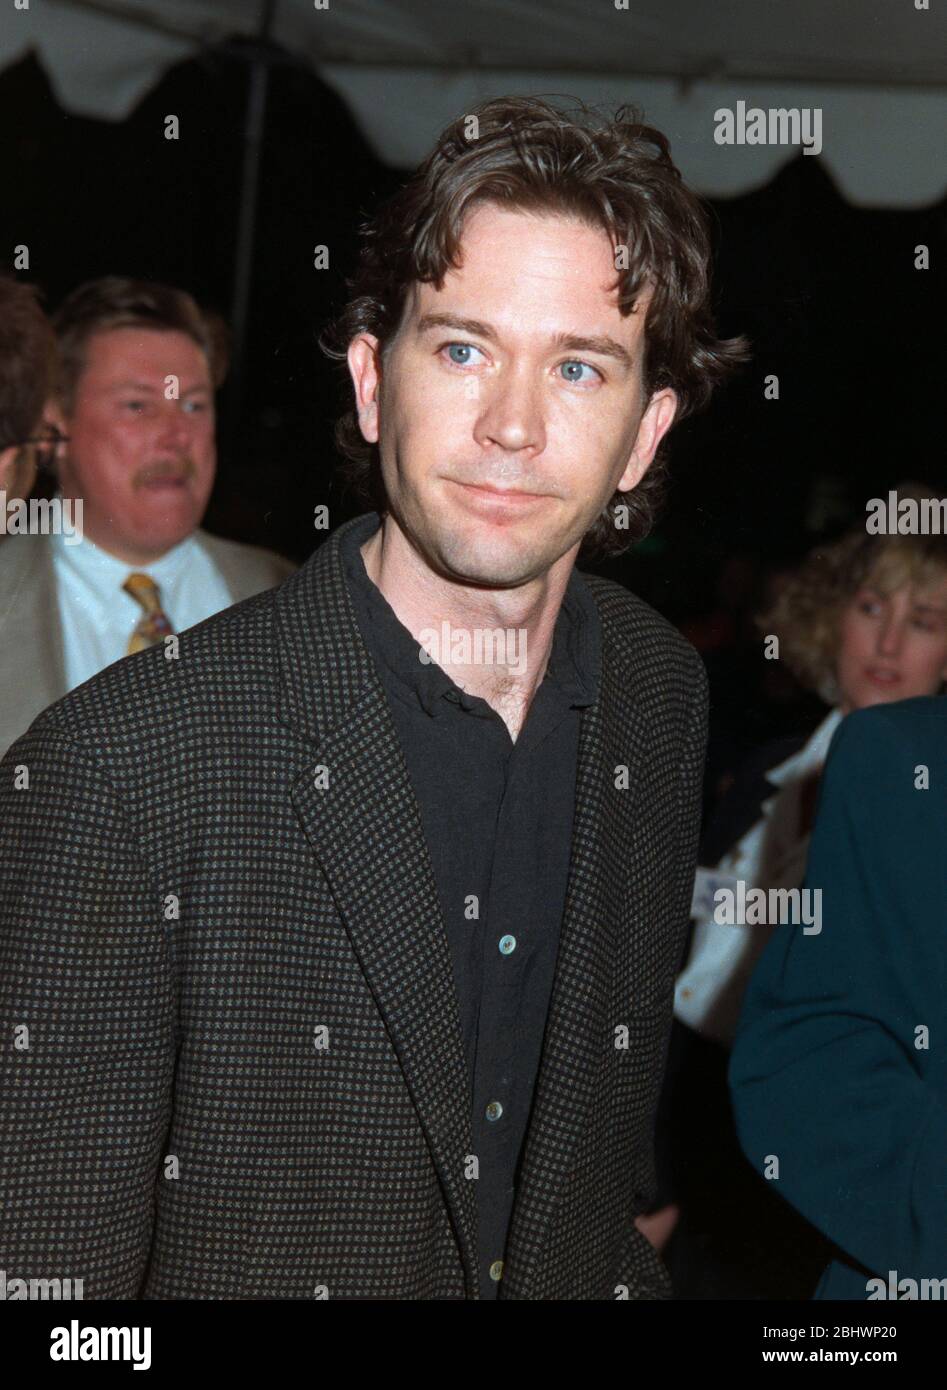 LOS ANGELES, CA. c.1993: Actor Timothy Hutton. File photo © Paul Smith/Featureflash  Stock Photo - Alamy